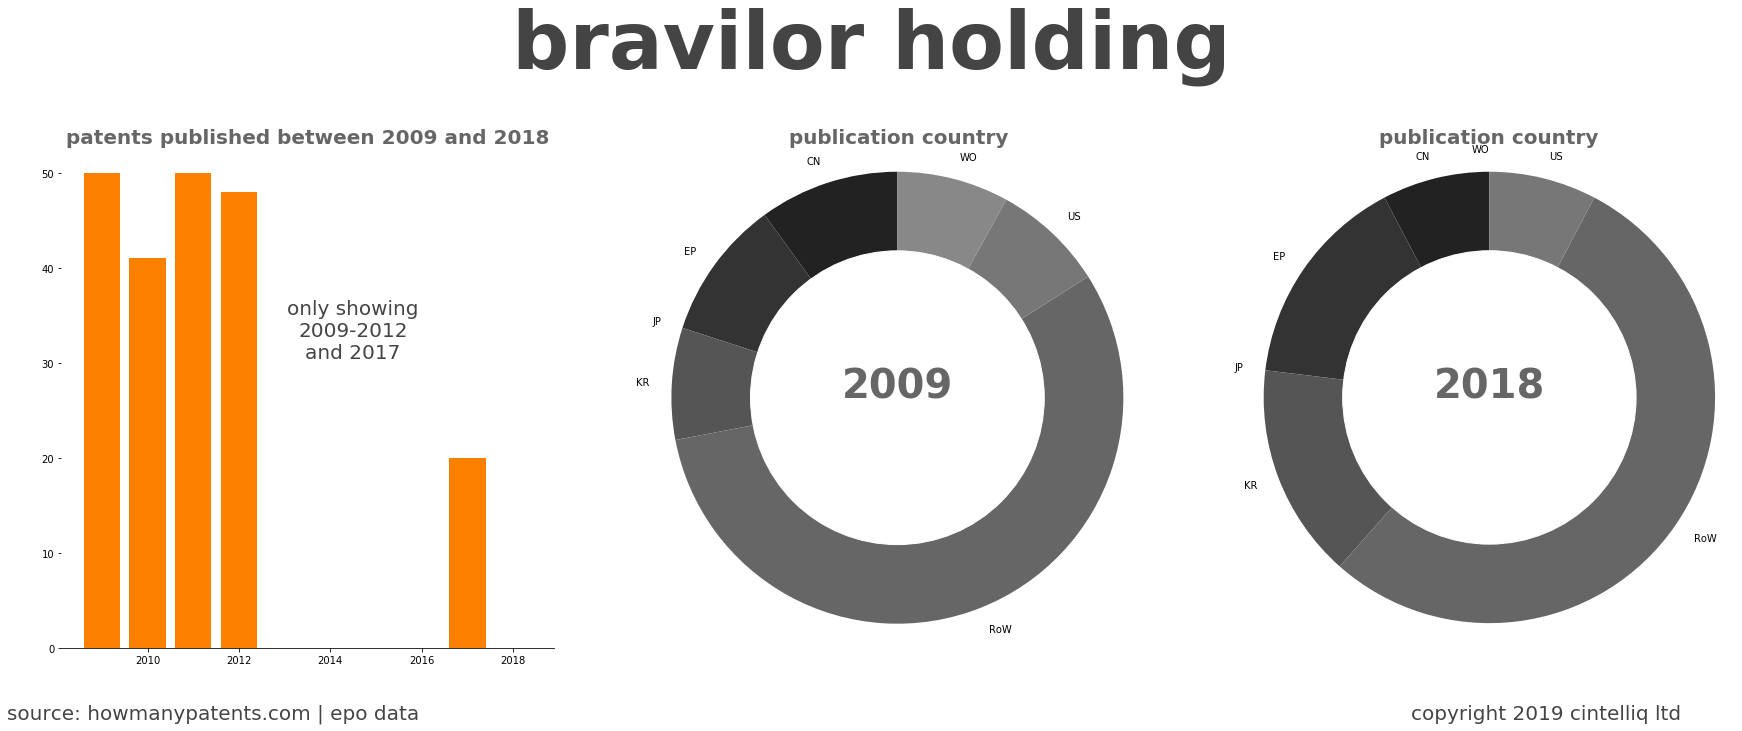 summary of patents for Bravilor Holding